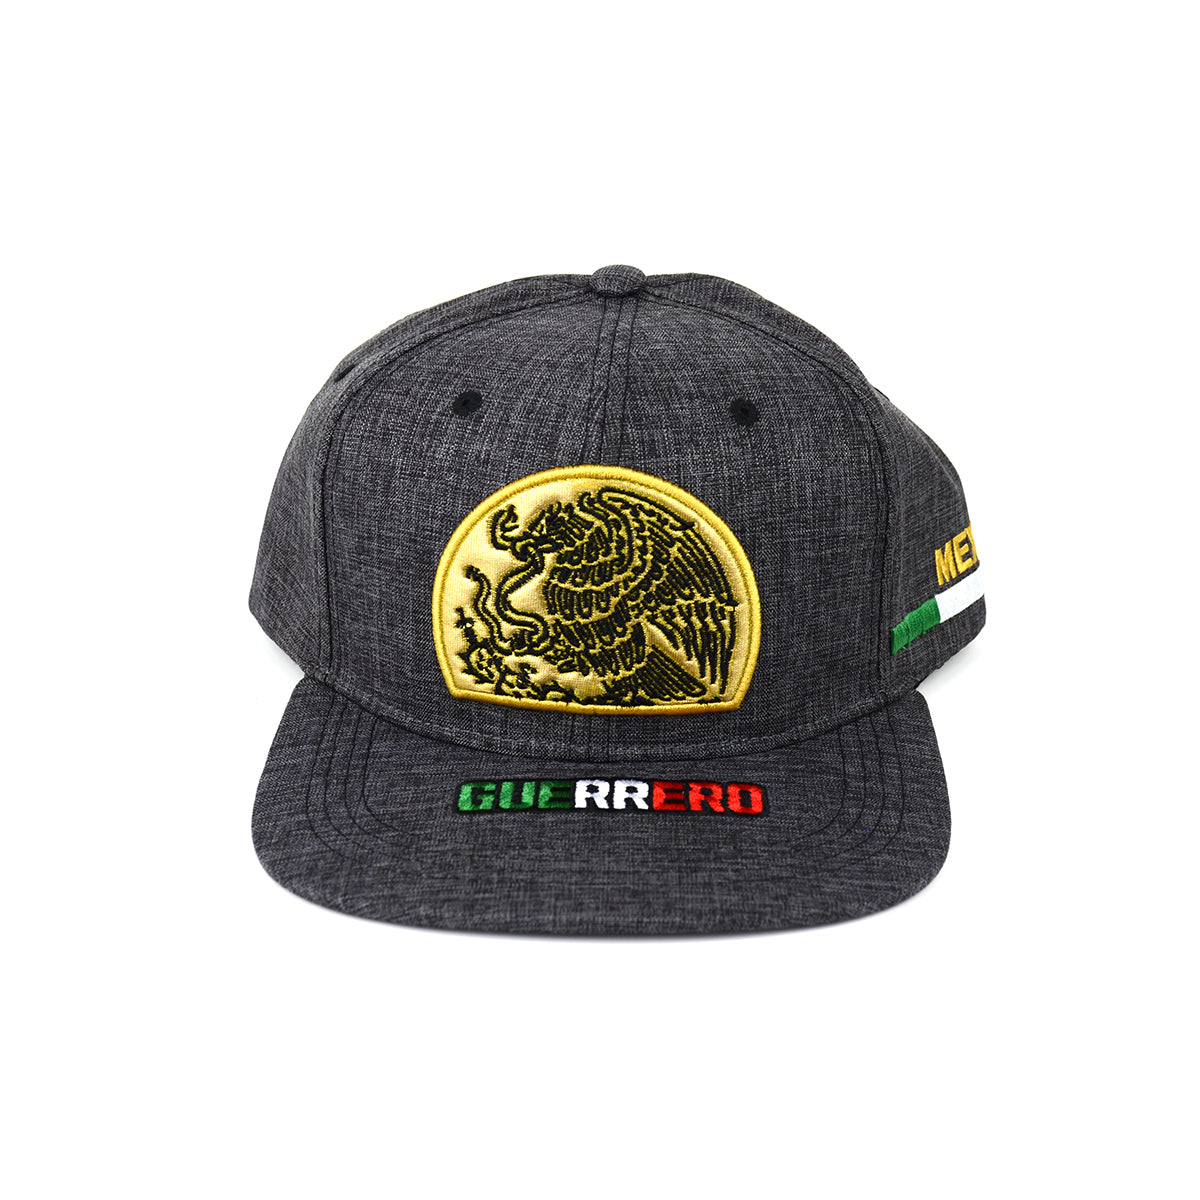 Snapback "Guerrero Mexico" Hat Embroidered